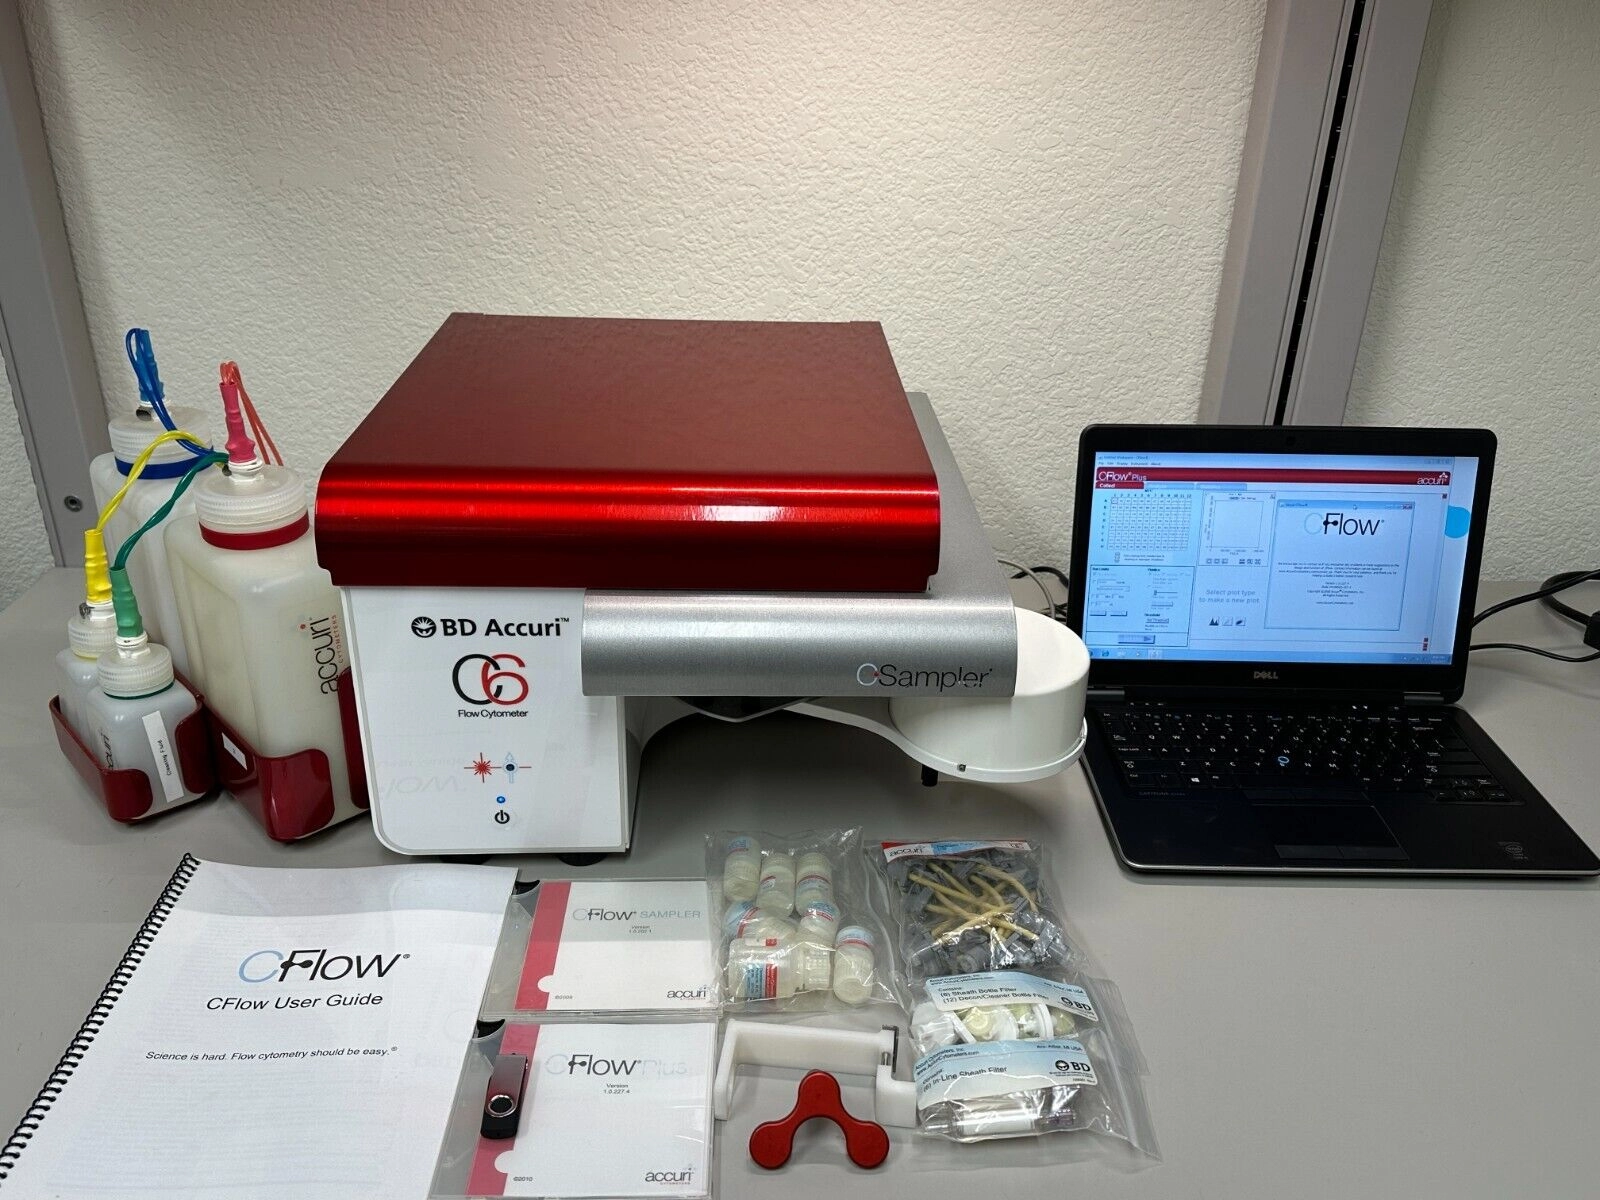 BD Accuri C6 and Csampler Flow Cytometer system wi